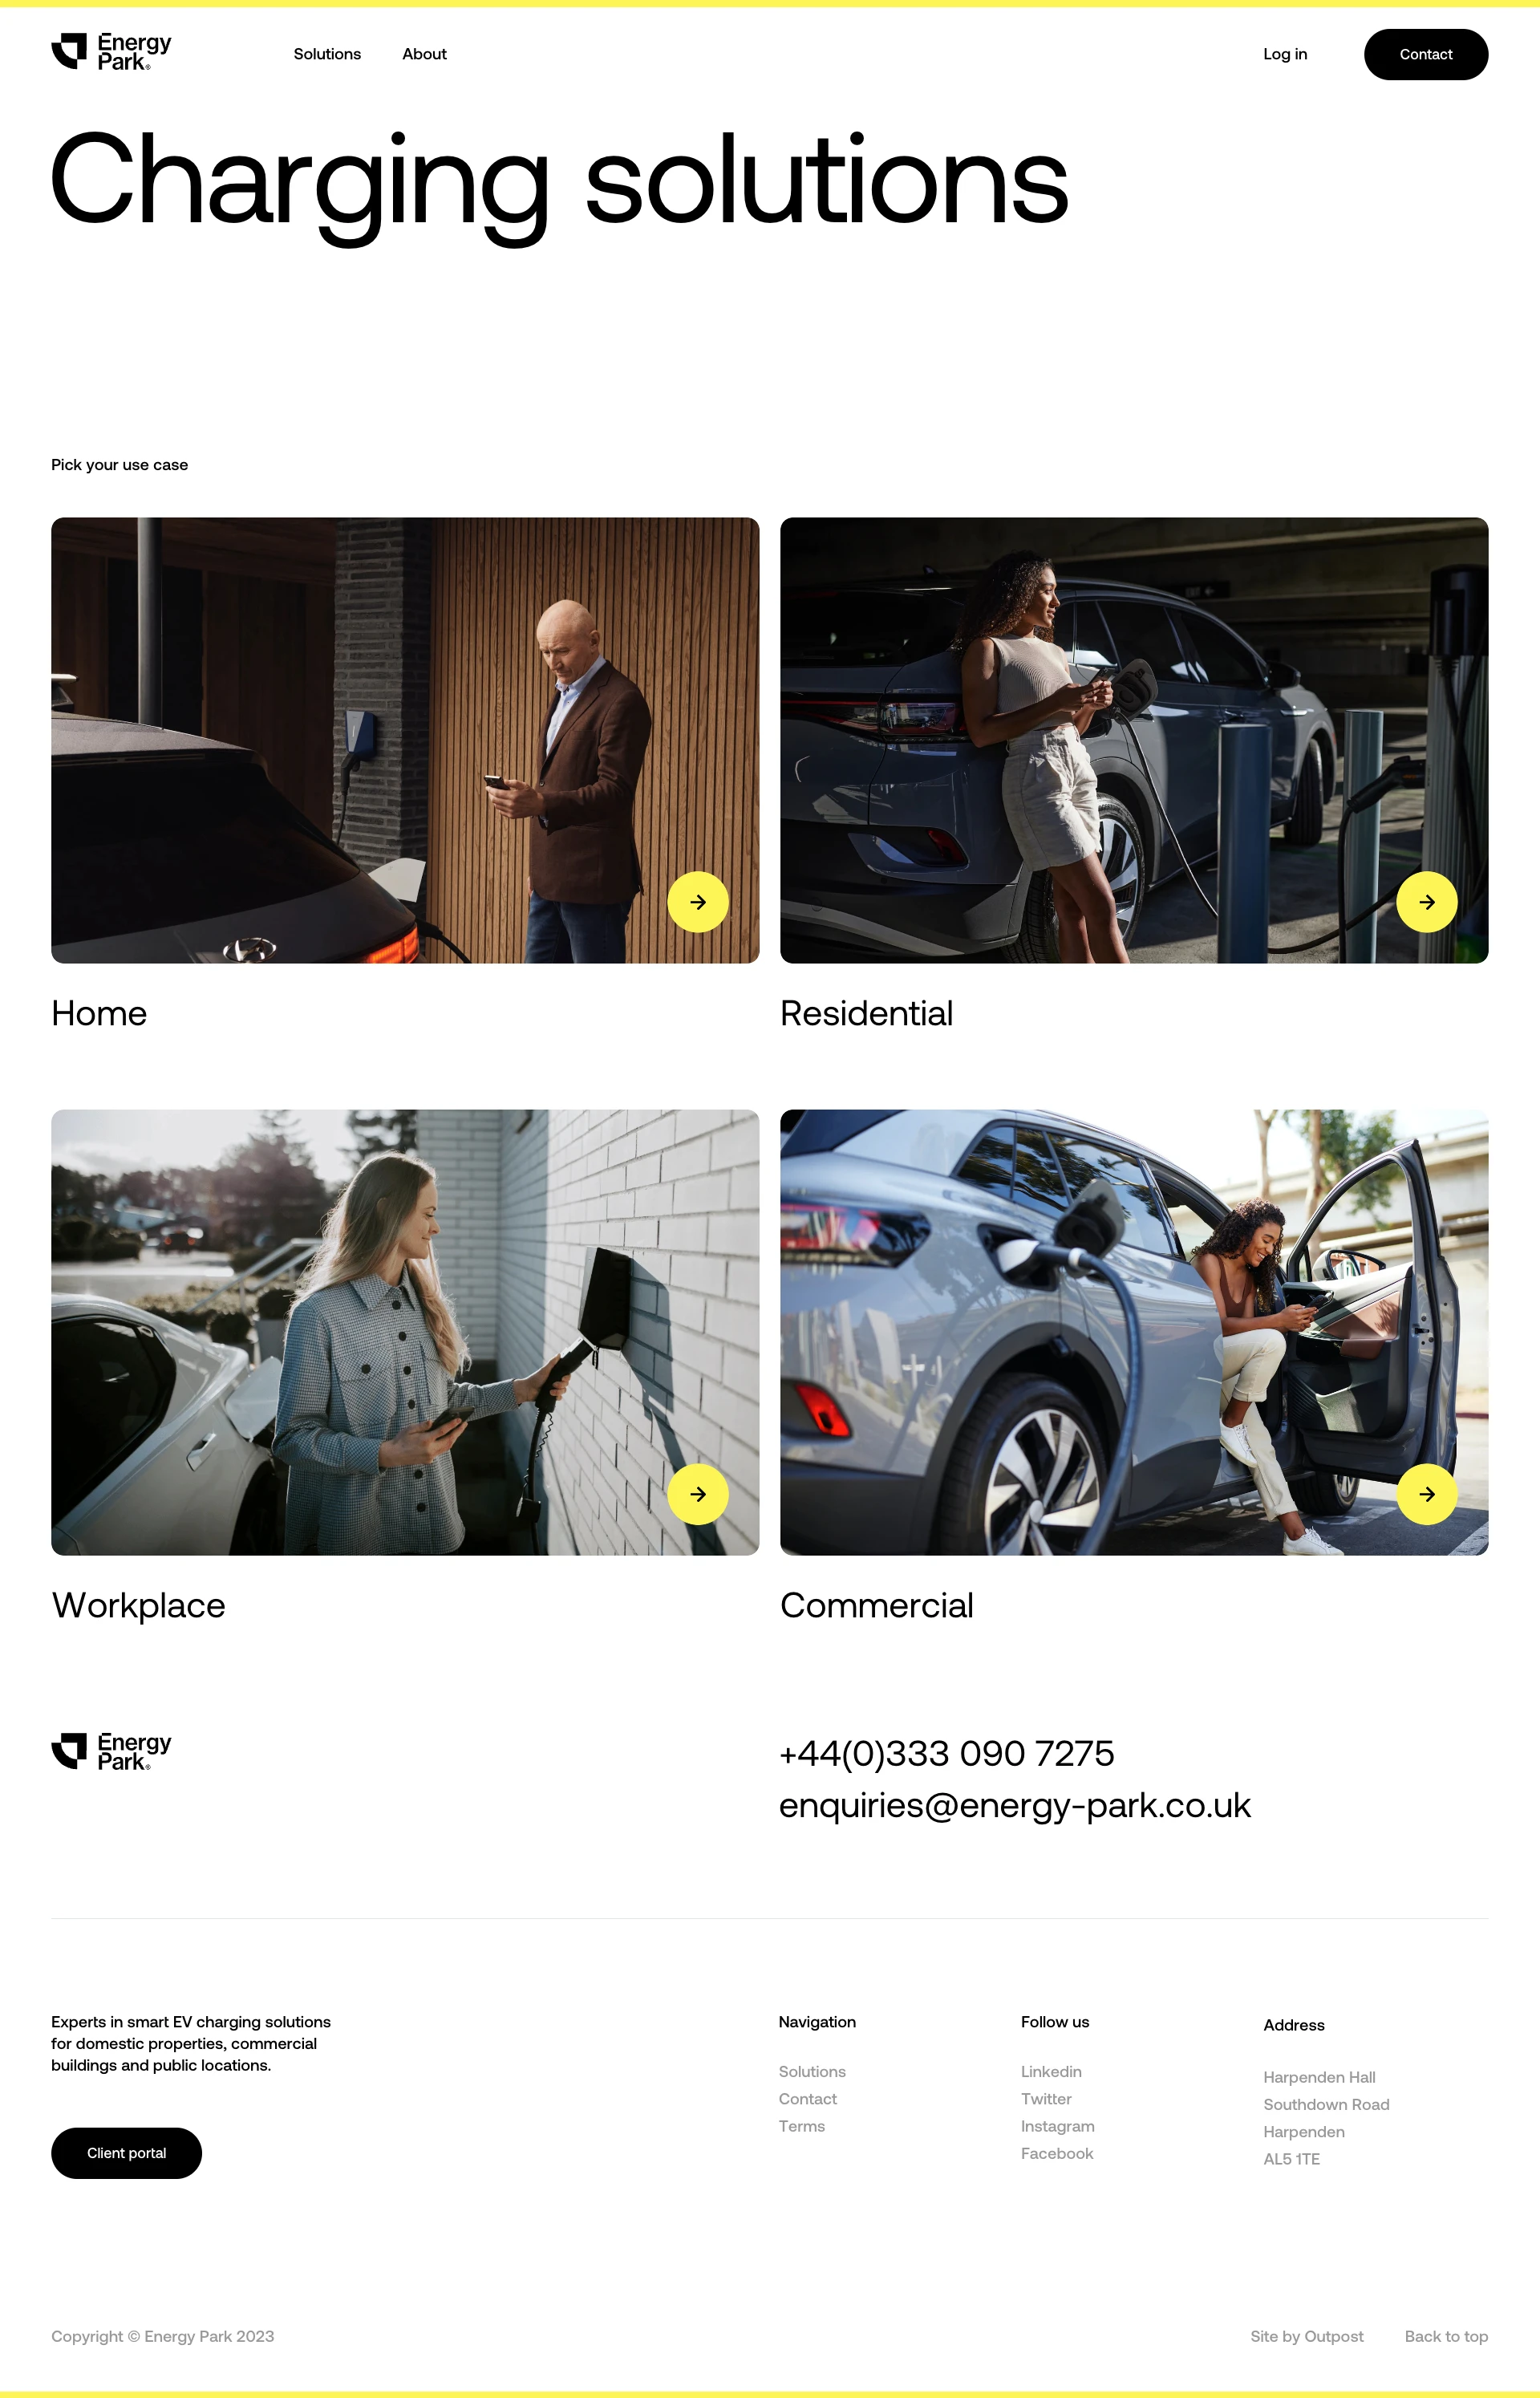 Energy Park Landing Page Example: Tailored EV charging solutions for homes, workplaces, residential sites and businesses. We provide expert guidance and ongoing customer support.